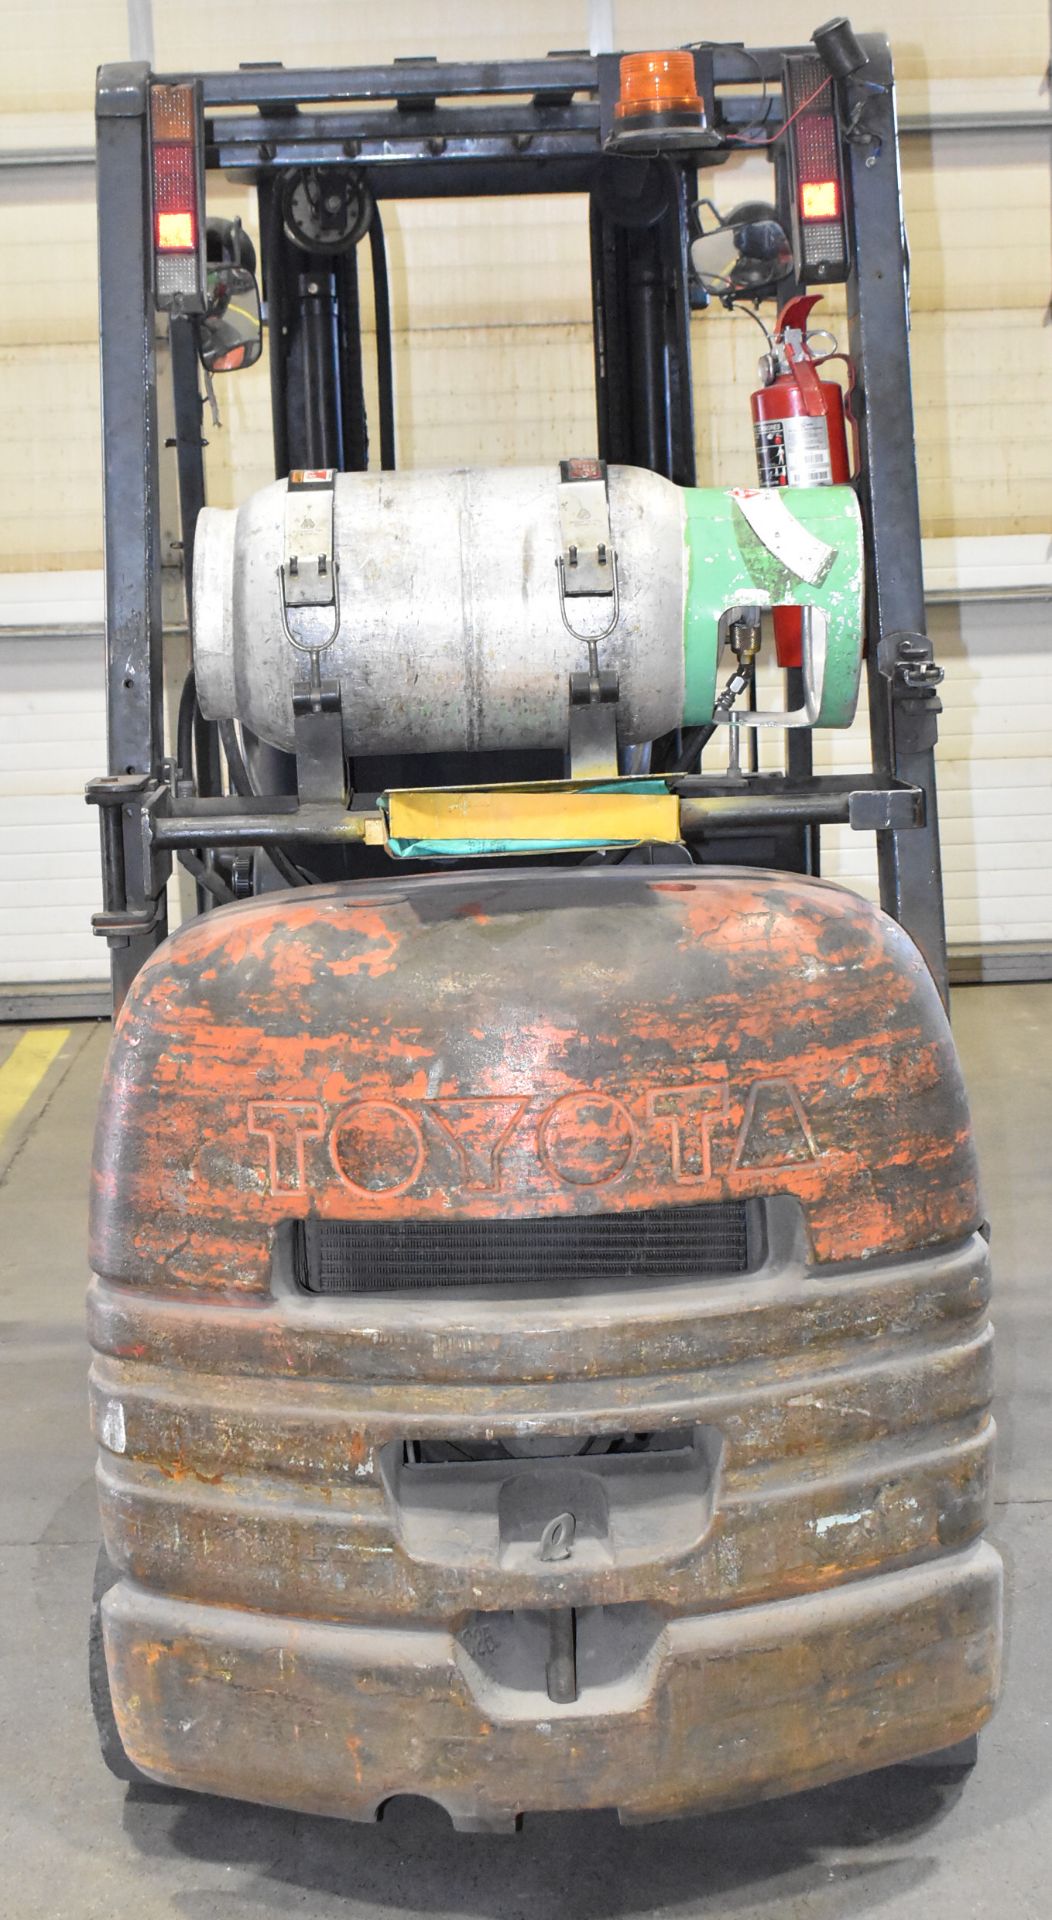 TOYOTA 42-6FGCU25 4,900 LB. CAPACITY LPG FORKLIFT WITH 189" MAX. LIFT HEIGHT, 3-STAGE MAST, SIDE - Image 5 of 17